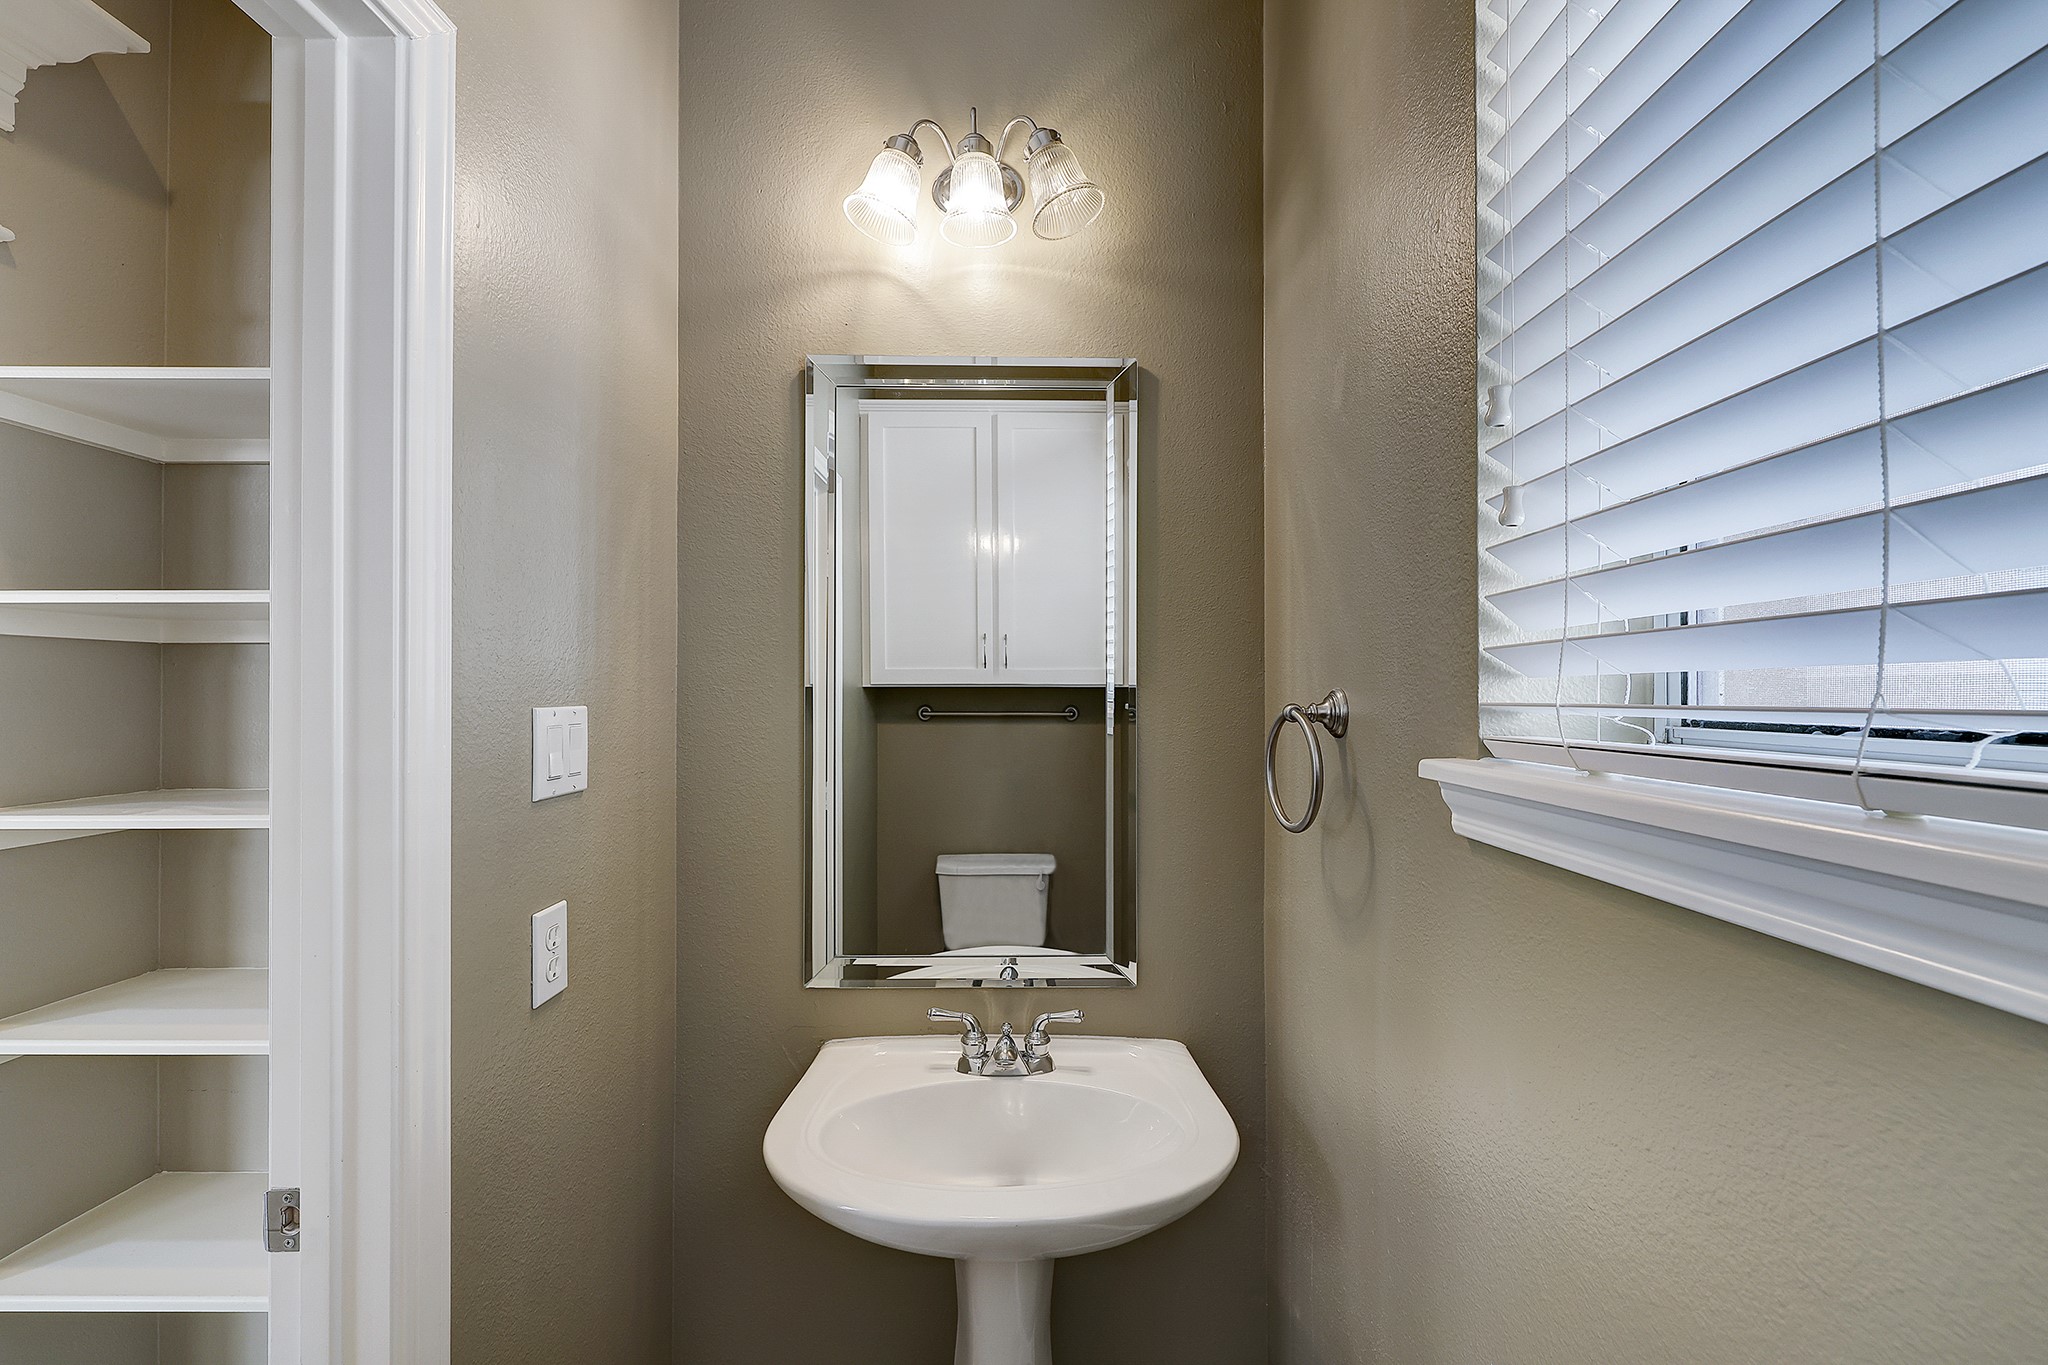 Conveniently located half bathroom on the main level, perfect for guest use